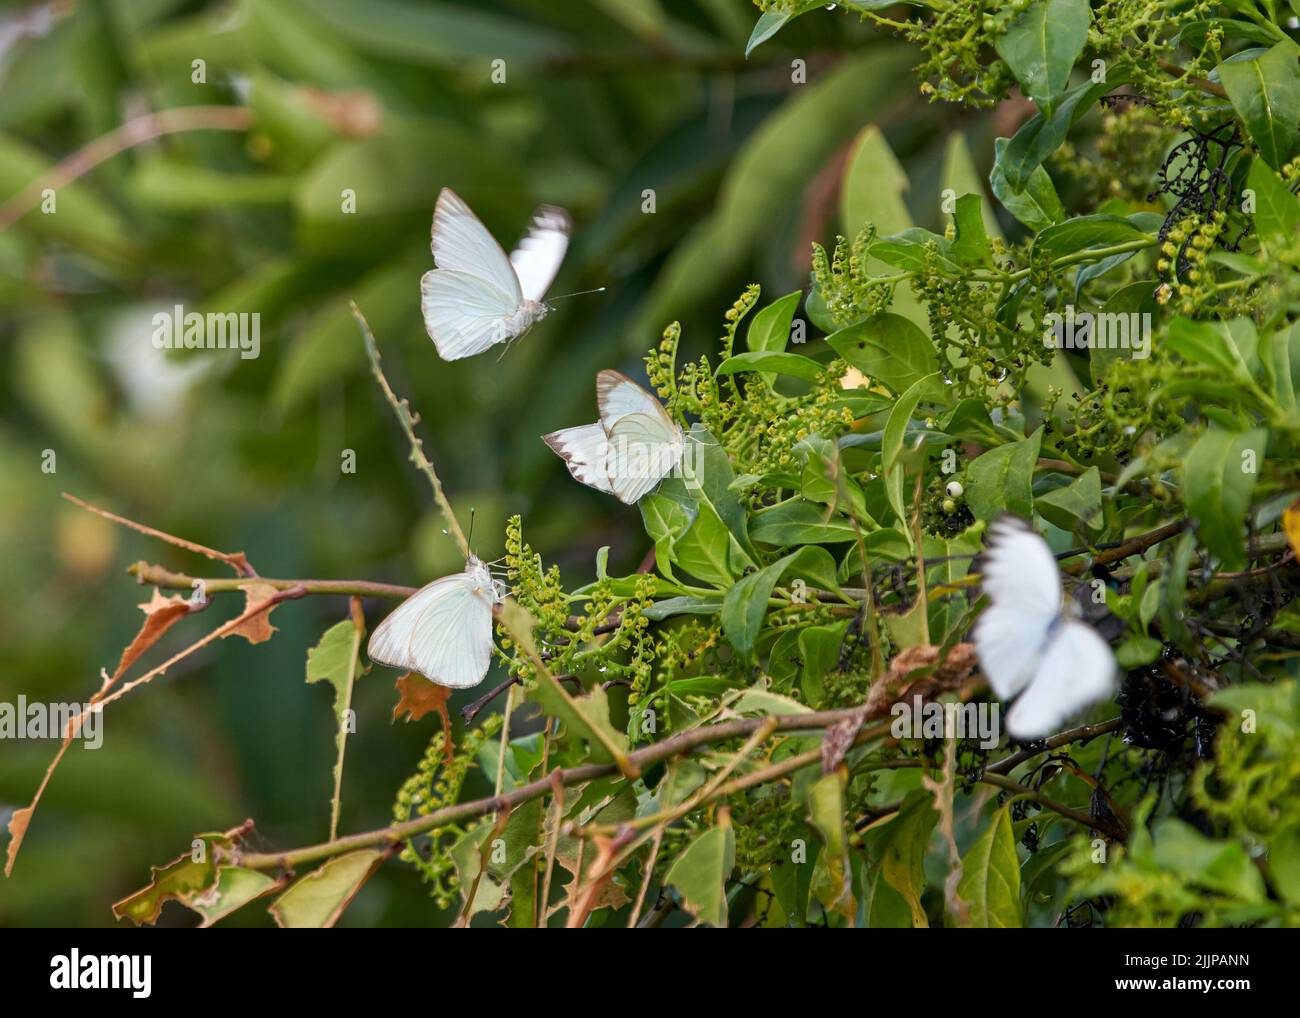 Large White Butterflies In Flight Low Angle View High-Res Stock Photo -  Getty Images